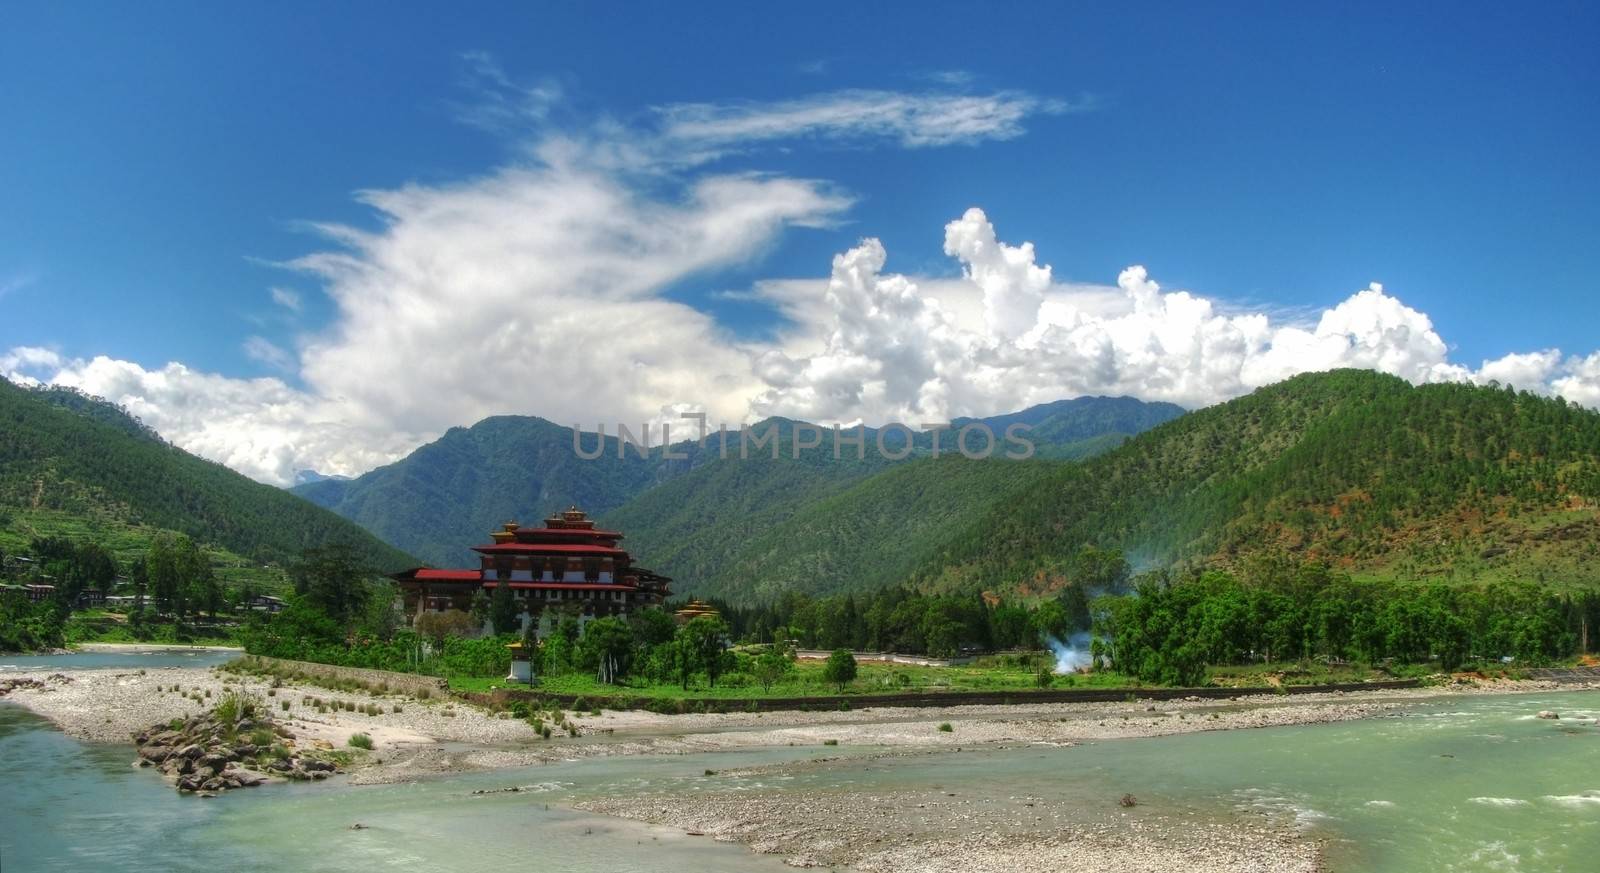 Punakha Dzong, the old capital of Bhutan, at the confluence of Pho Chu and Mo Chu rivers